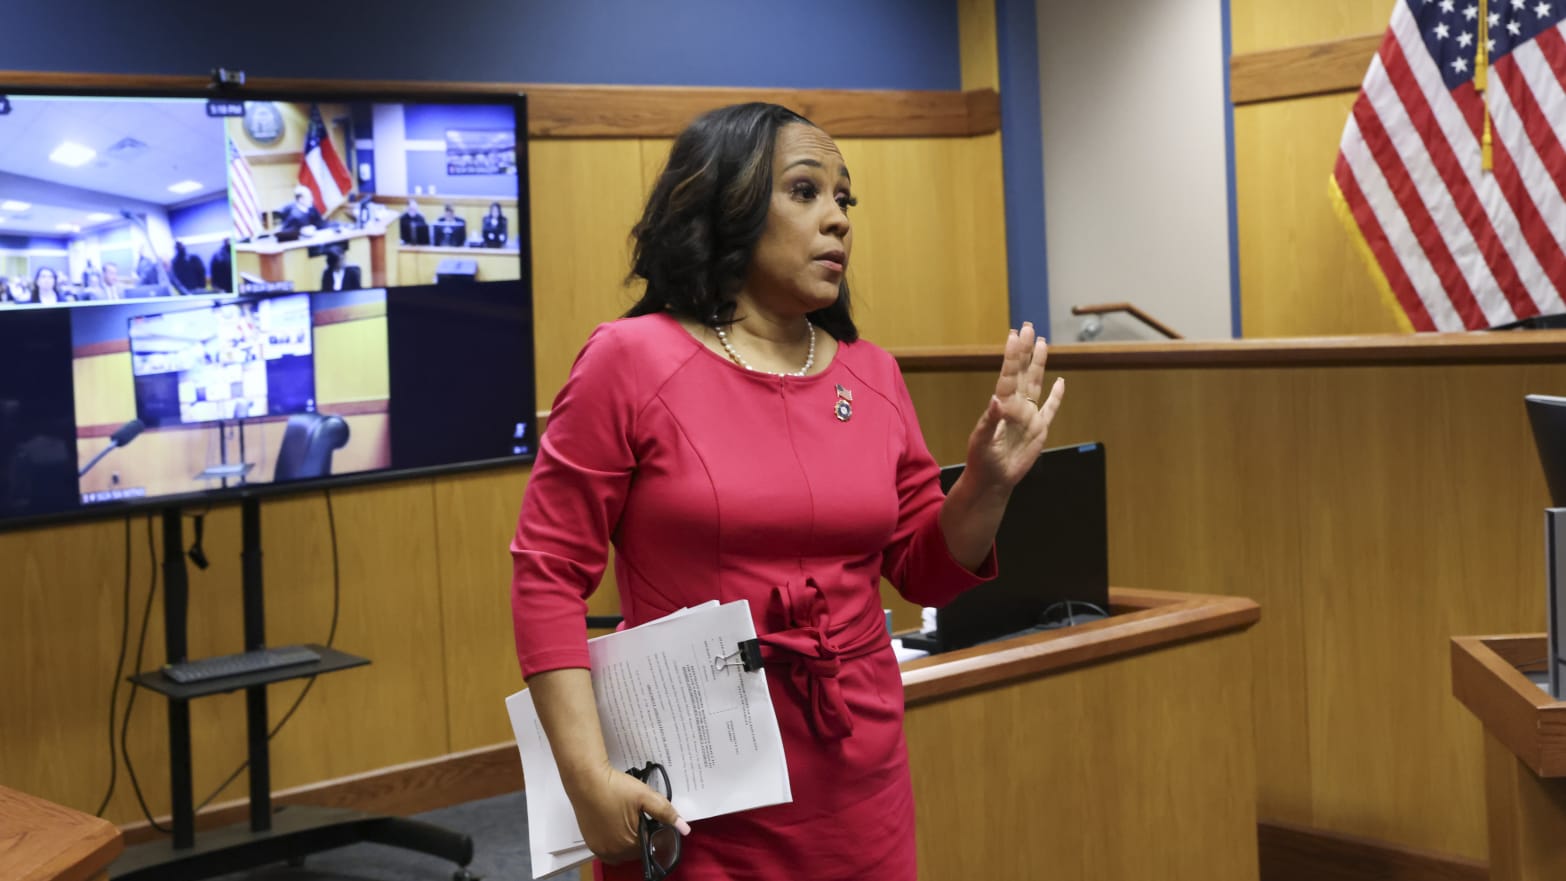 Fulton County District Attorney Fani Willis speaks during a hearing in the case of State of Georgia v. Donald John Trump